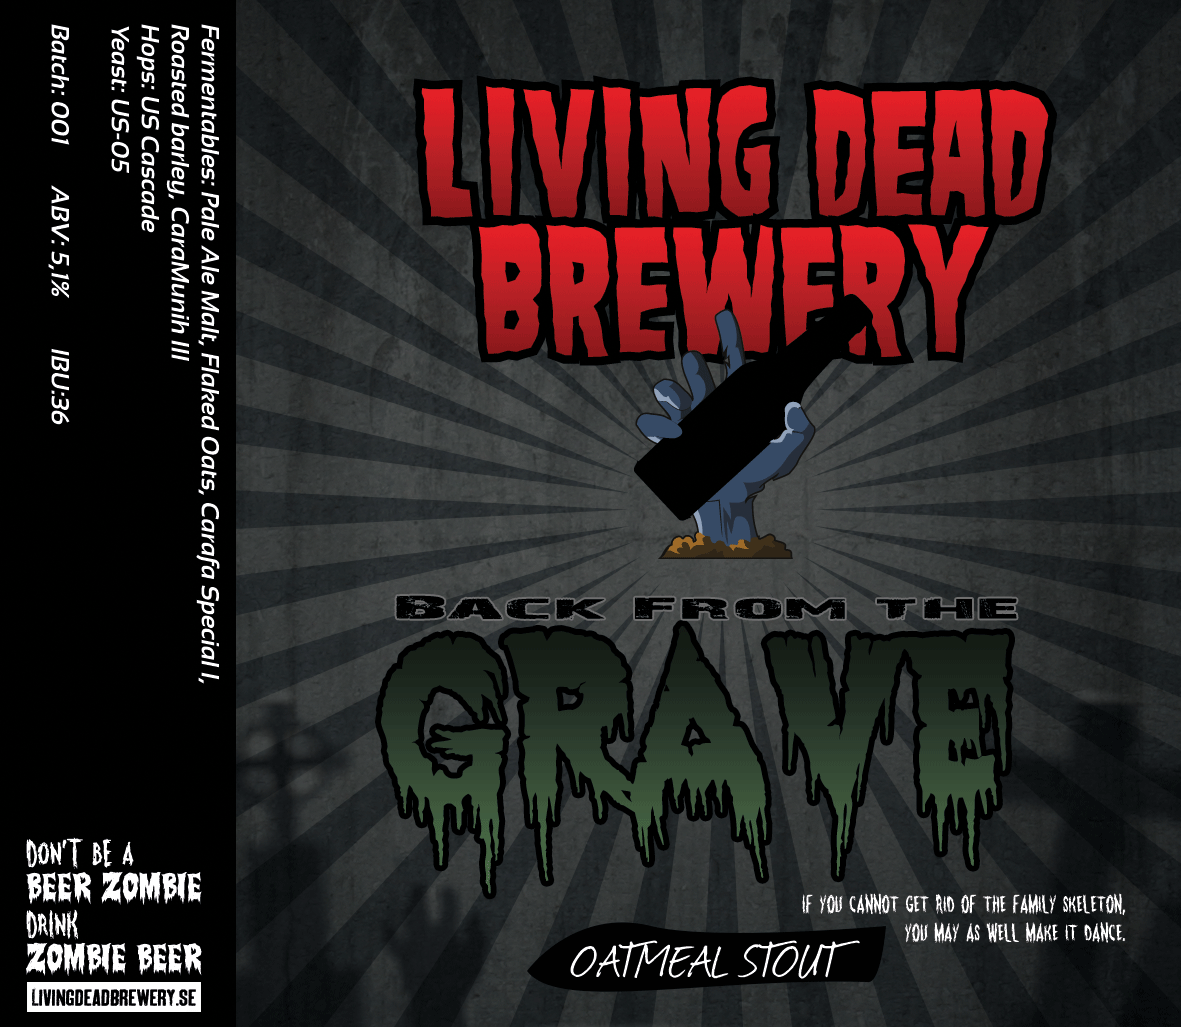 Back From The Grave [Oatmeal Stout]